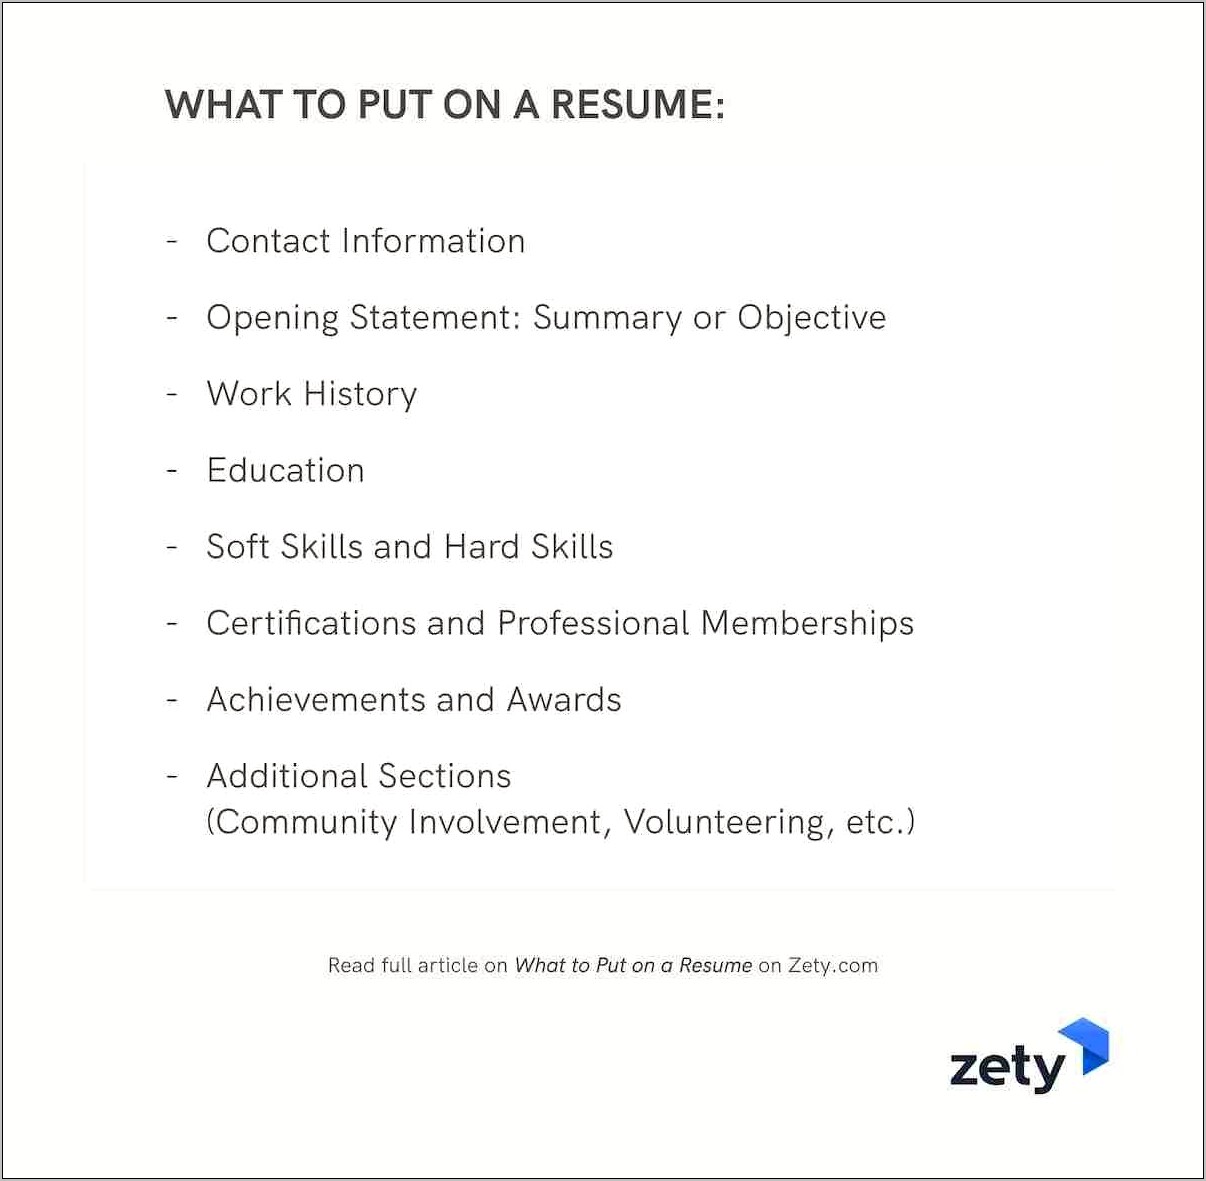 list-of-common-to-put-on-resume-resume-example-gallery